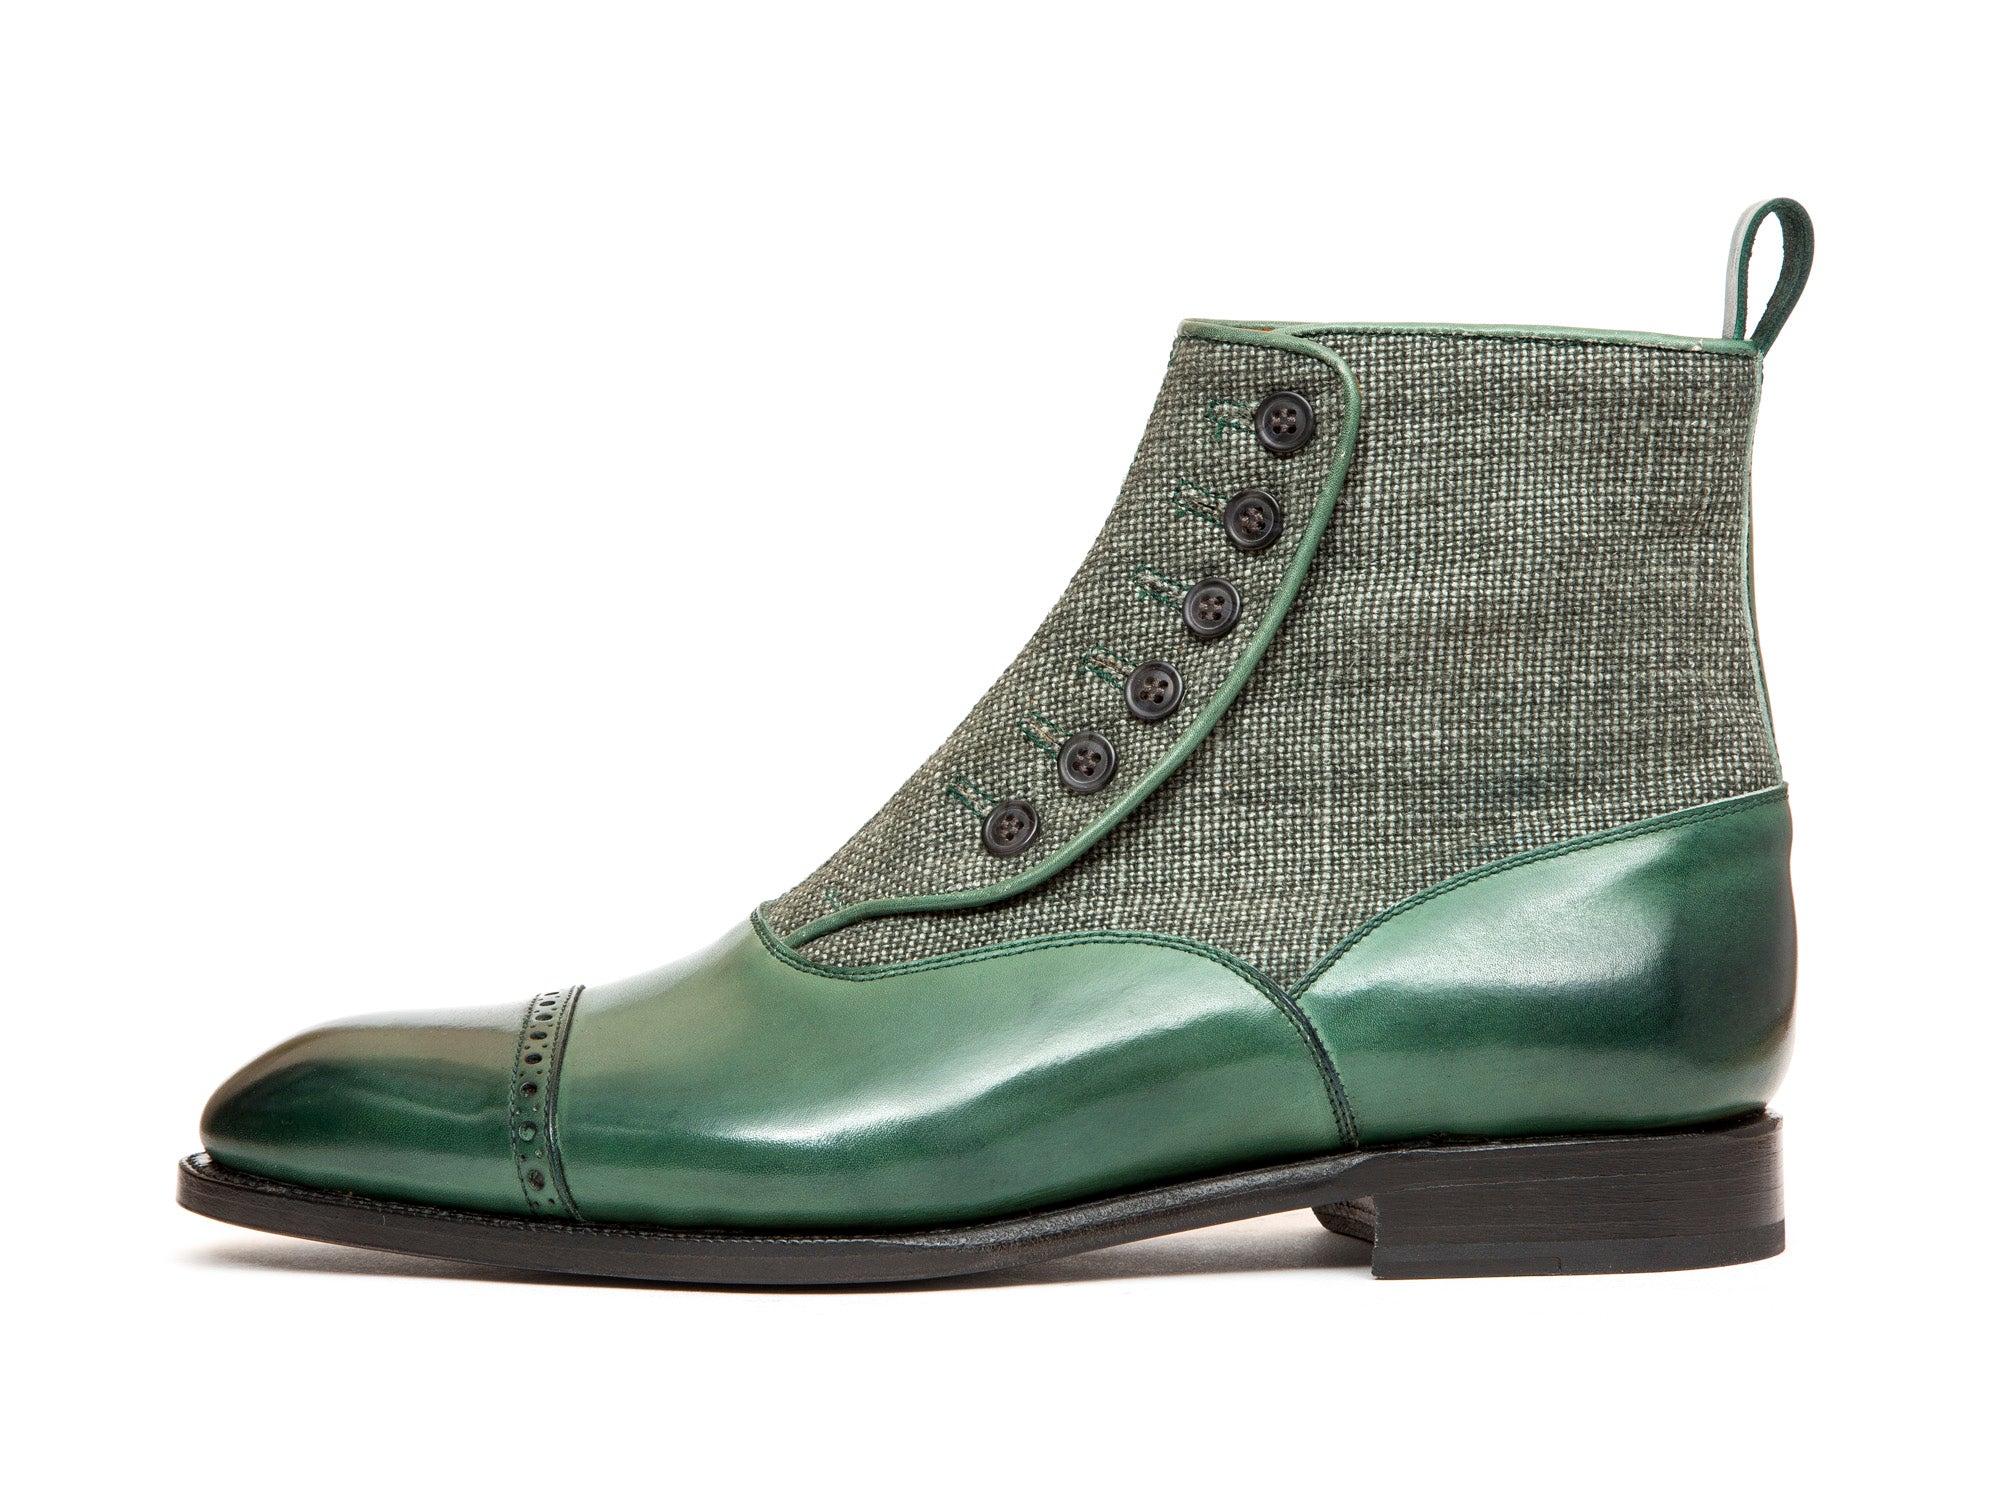 Carkeek - MTO - Forest Green Calf / Military Canvas - NGT Last - Single Leather Sole